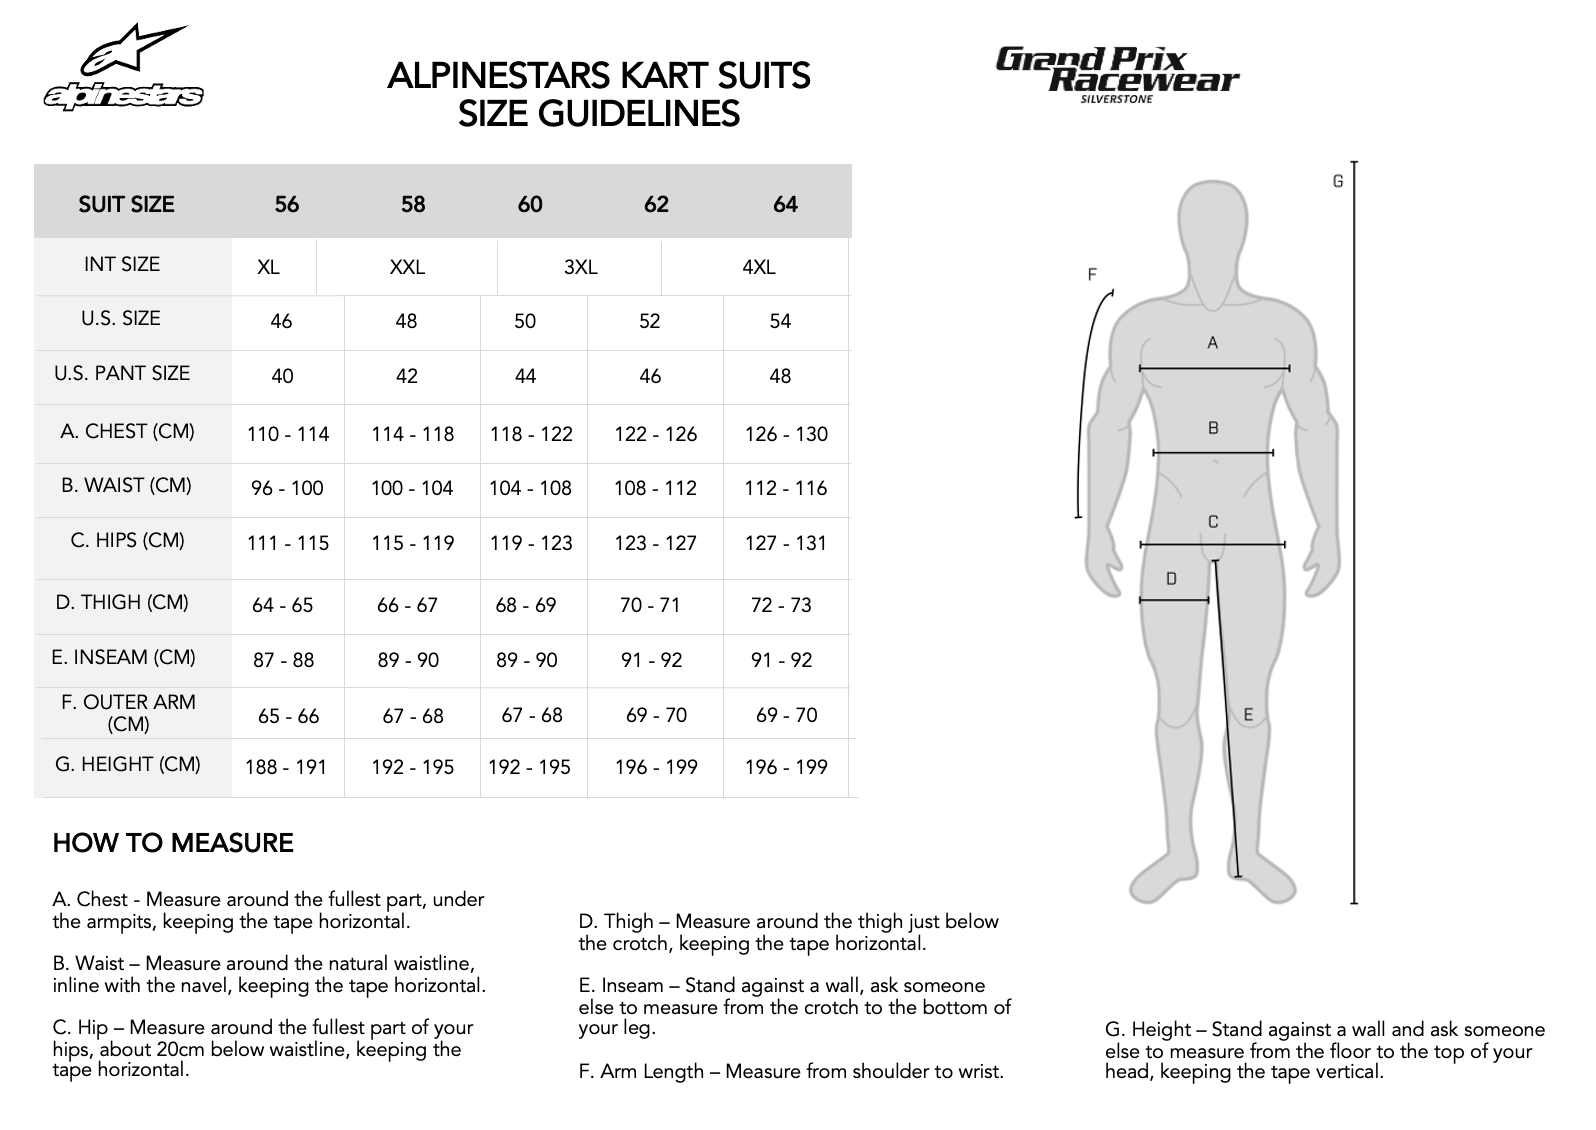 Size guide for Adult Alpinestars Kart Suits available from www.gprdirect.com